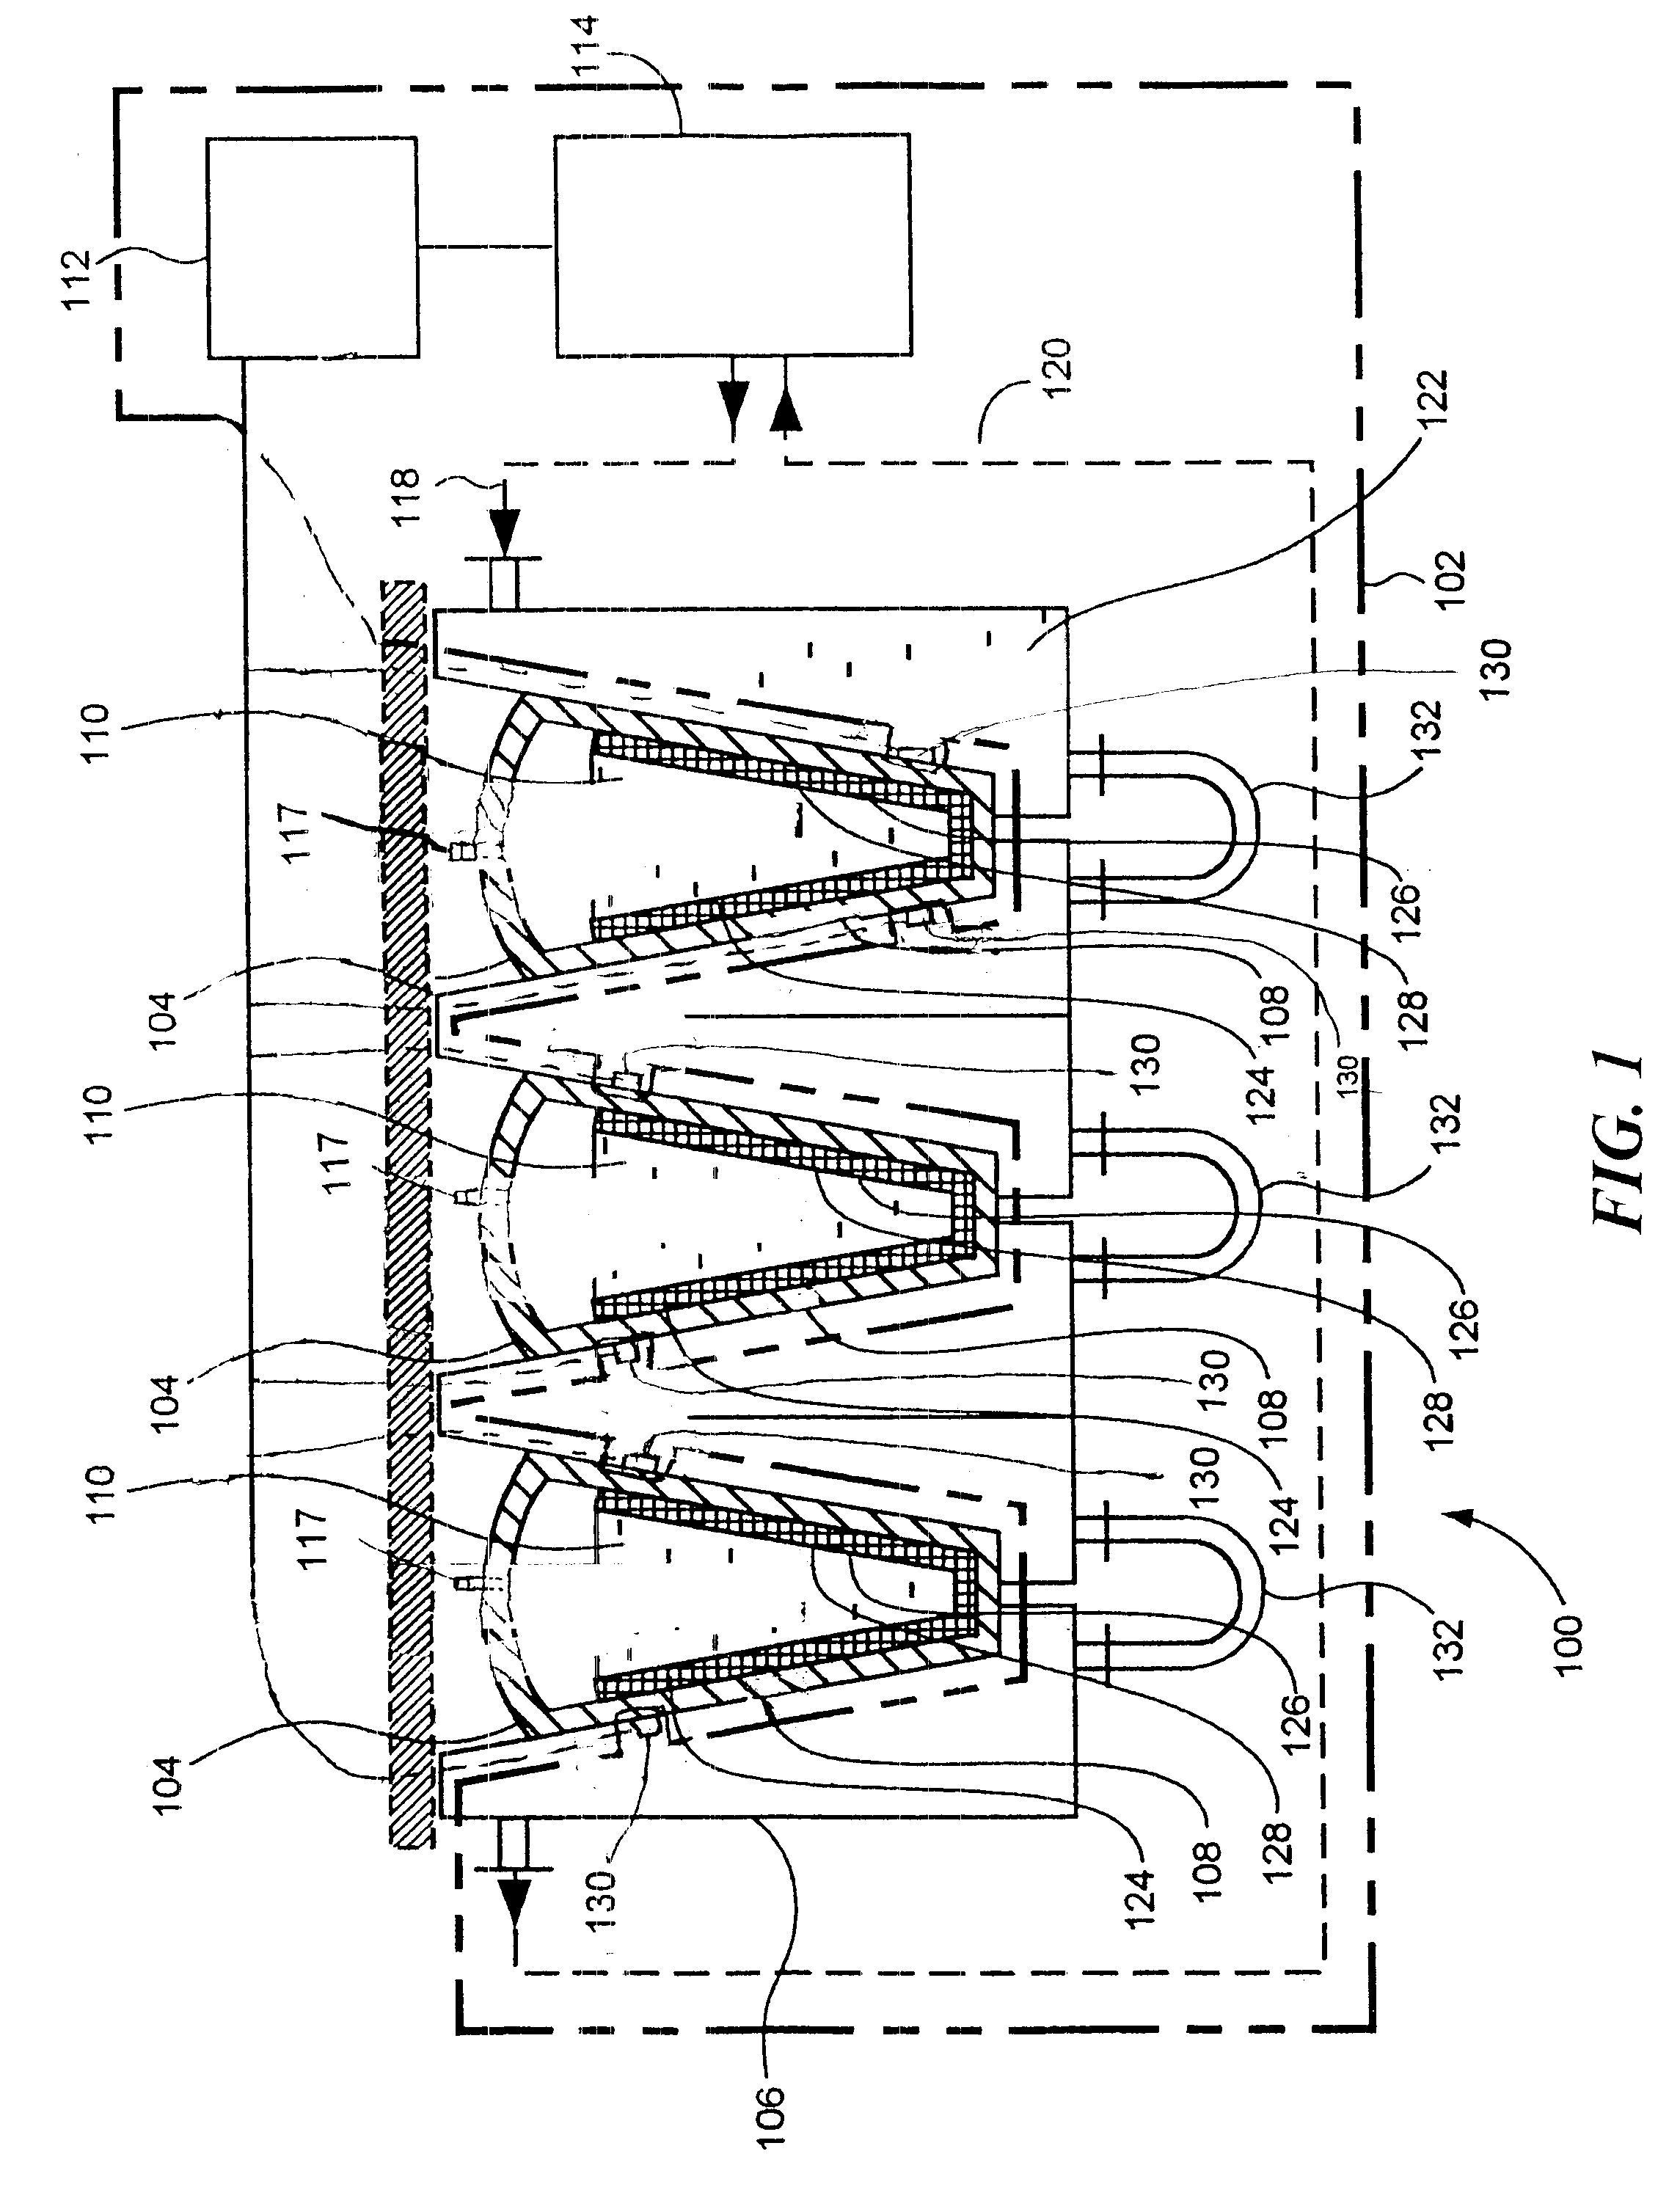 Cryopreservation system with controlled dendritic freezing front velocity